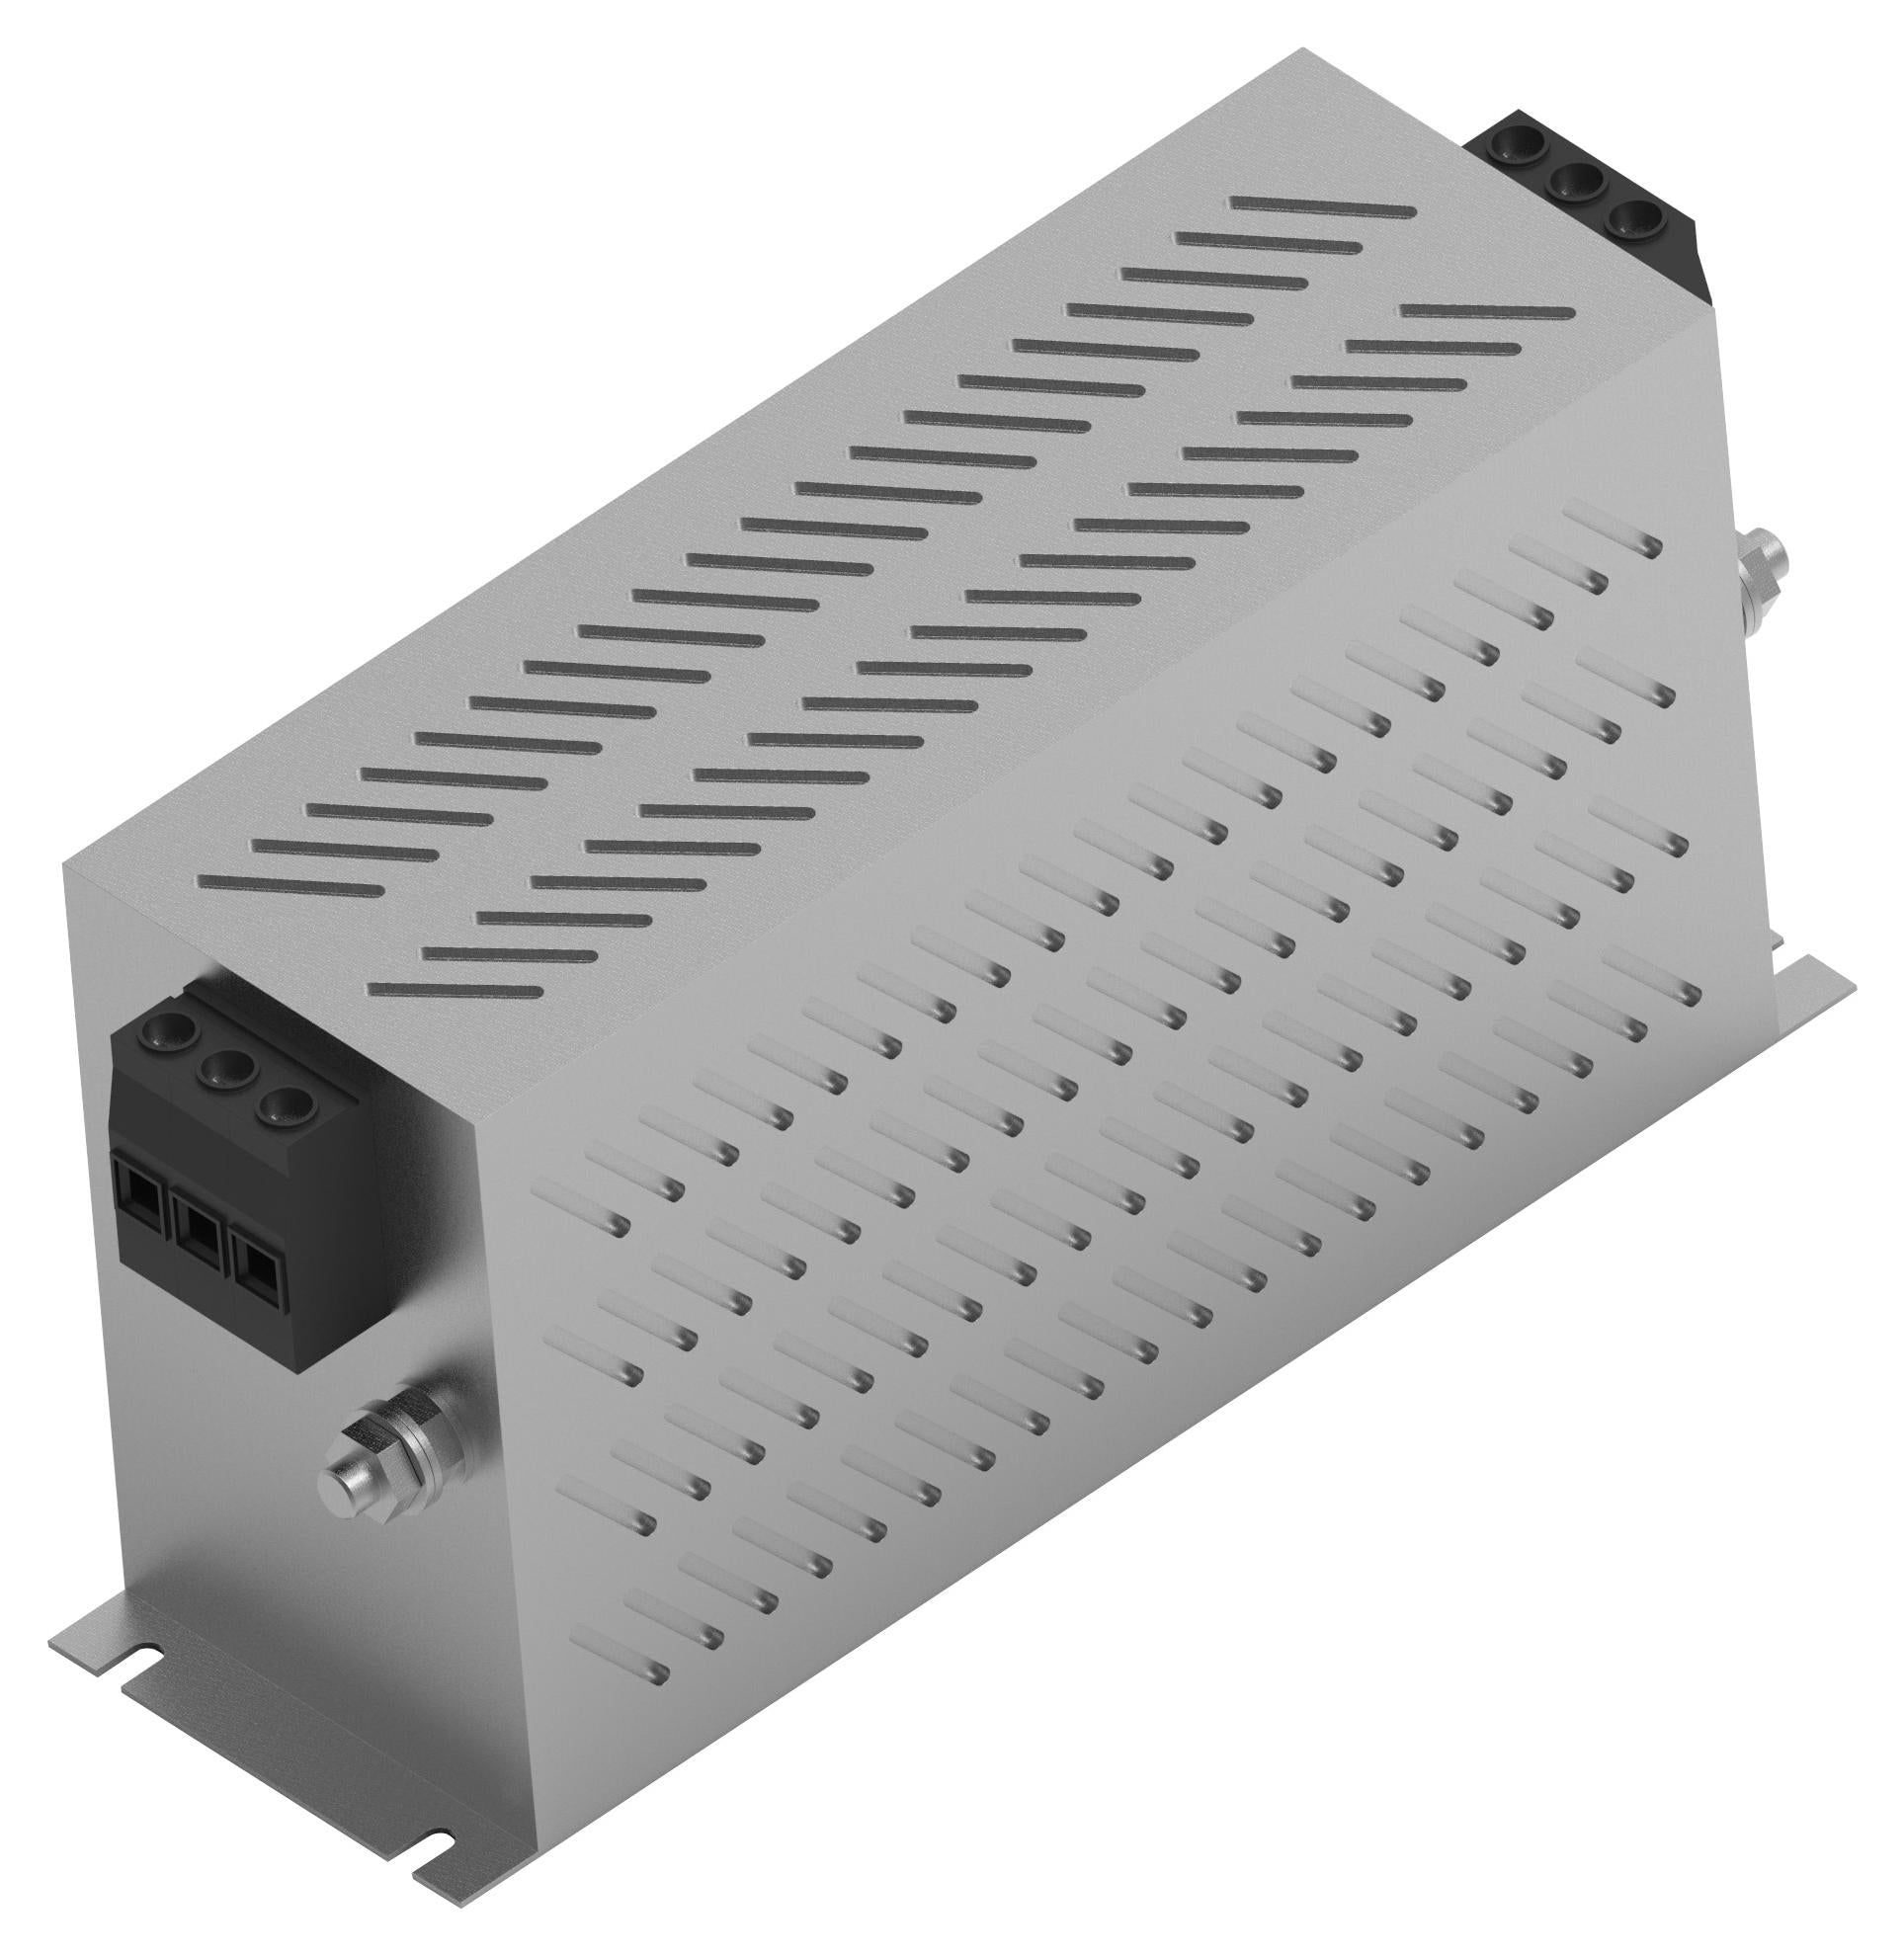 100KEMS10ABSD POWER LINE FILTER, 3 PHASE, 100A, 440VAC CORCOM - TE CONNECTIVITY